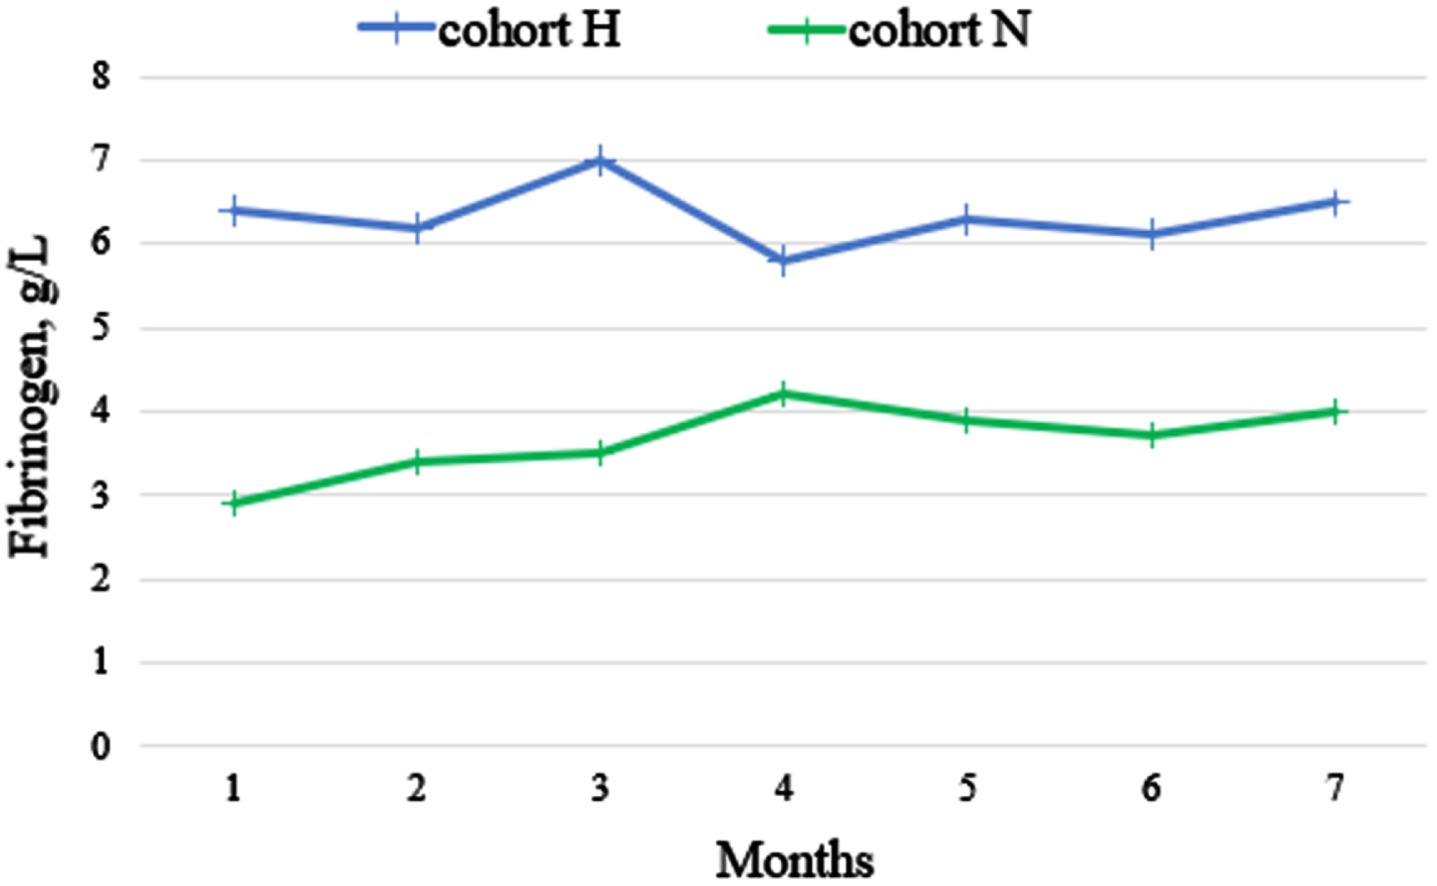 The change in median fibrinogen concentration during nivolumab therapy.